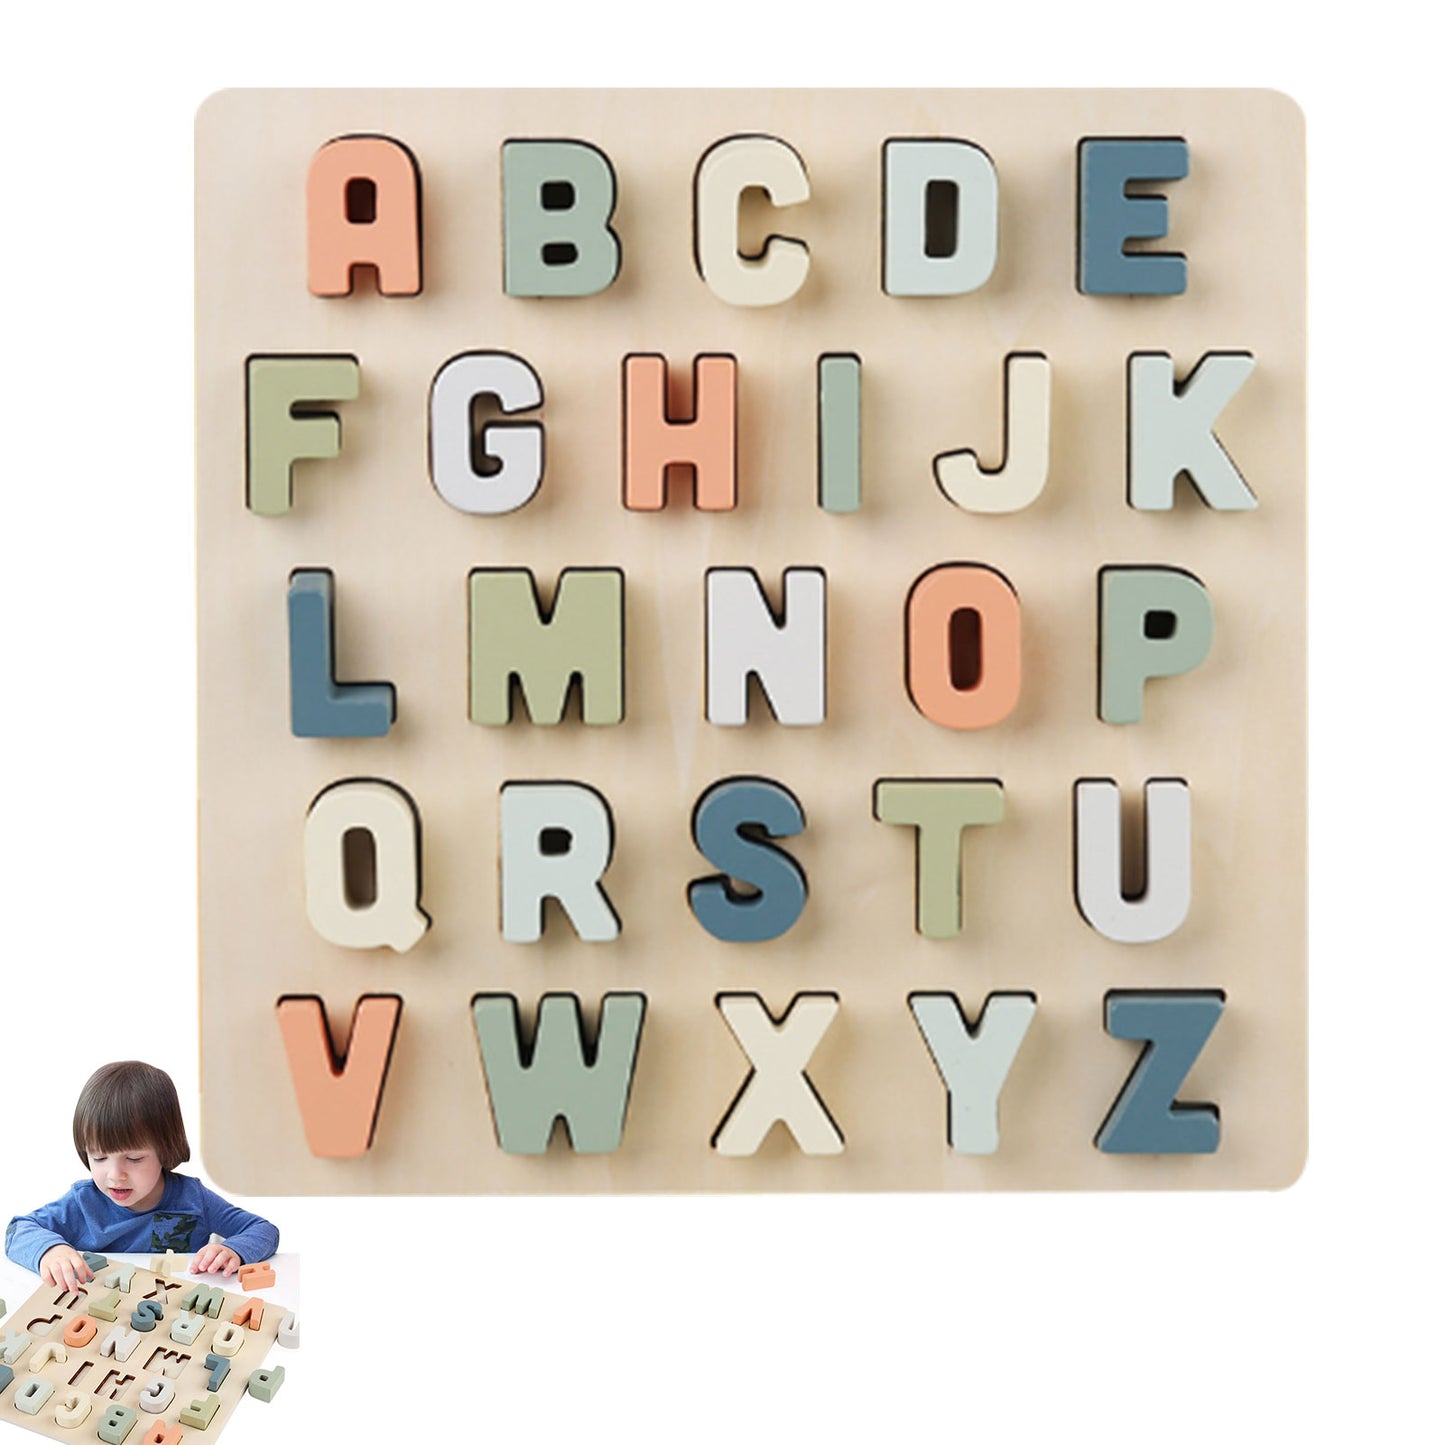 Toddlers Wooden ABC Letter Puzzles Early Educational Learning Toys 3D Puzzle Board Game Alphabet Blocks For Kids Birthday Gifts